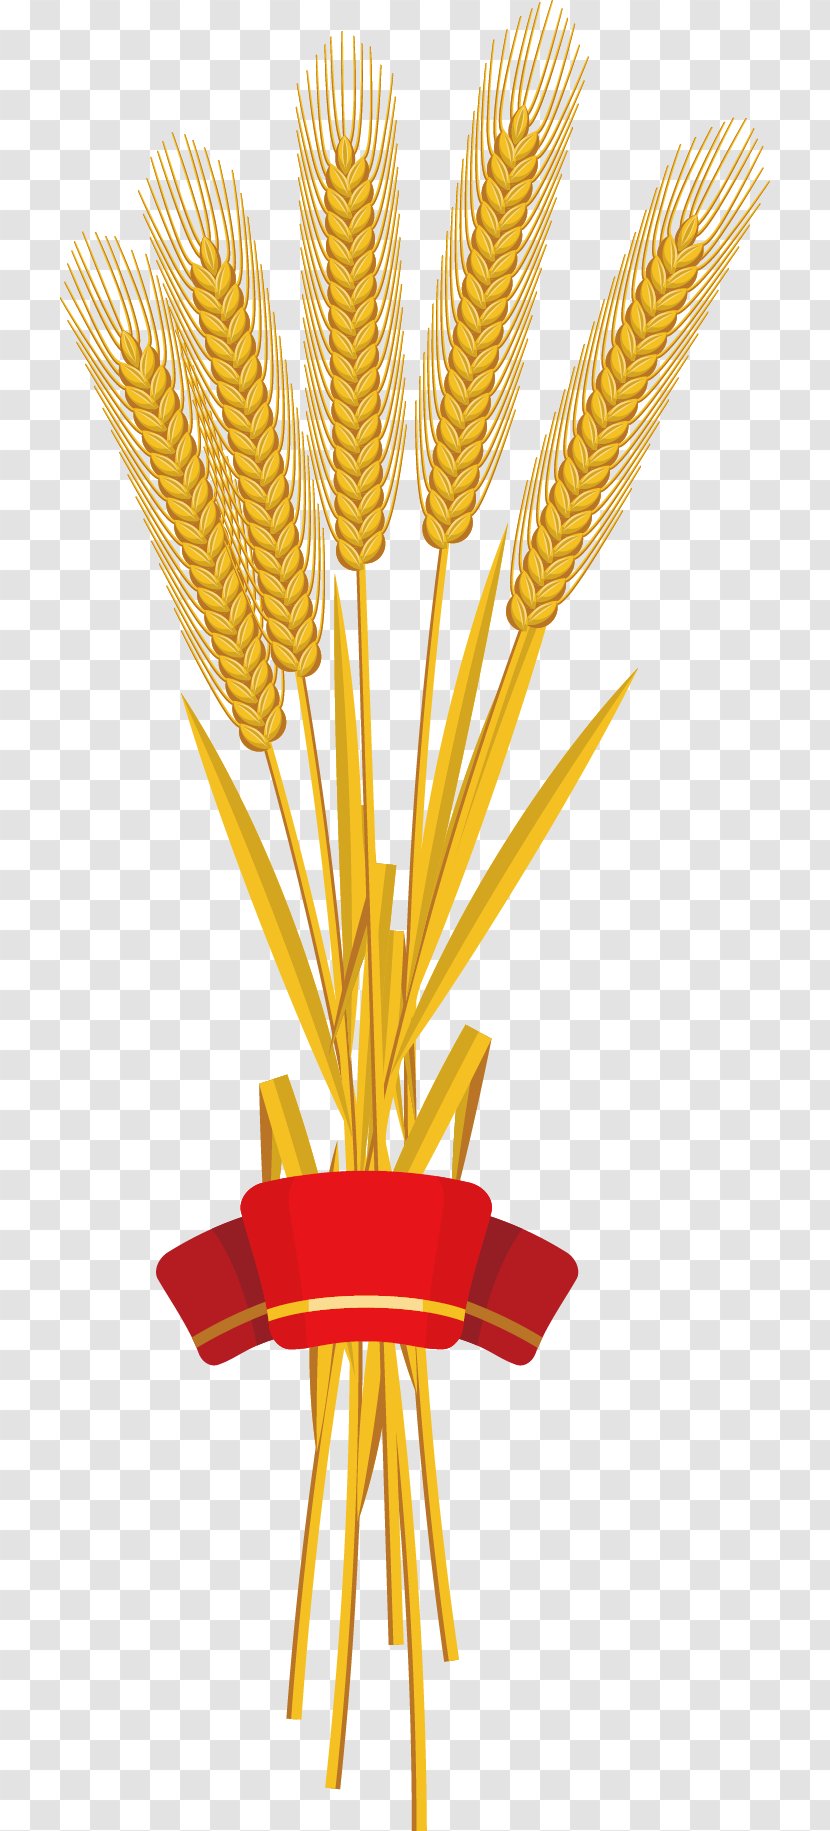 Red Ribbon Wheat - Commodity - Harvest Transparent PNG